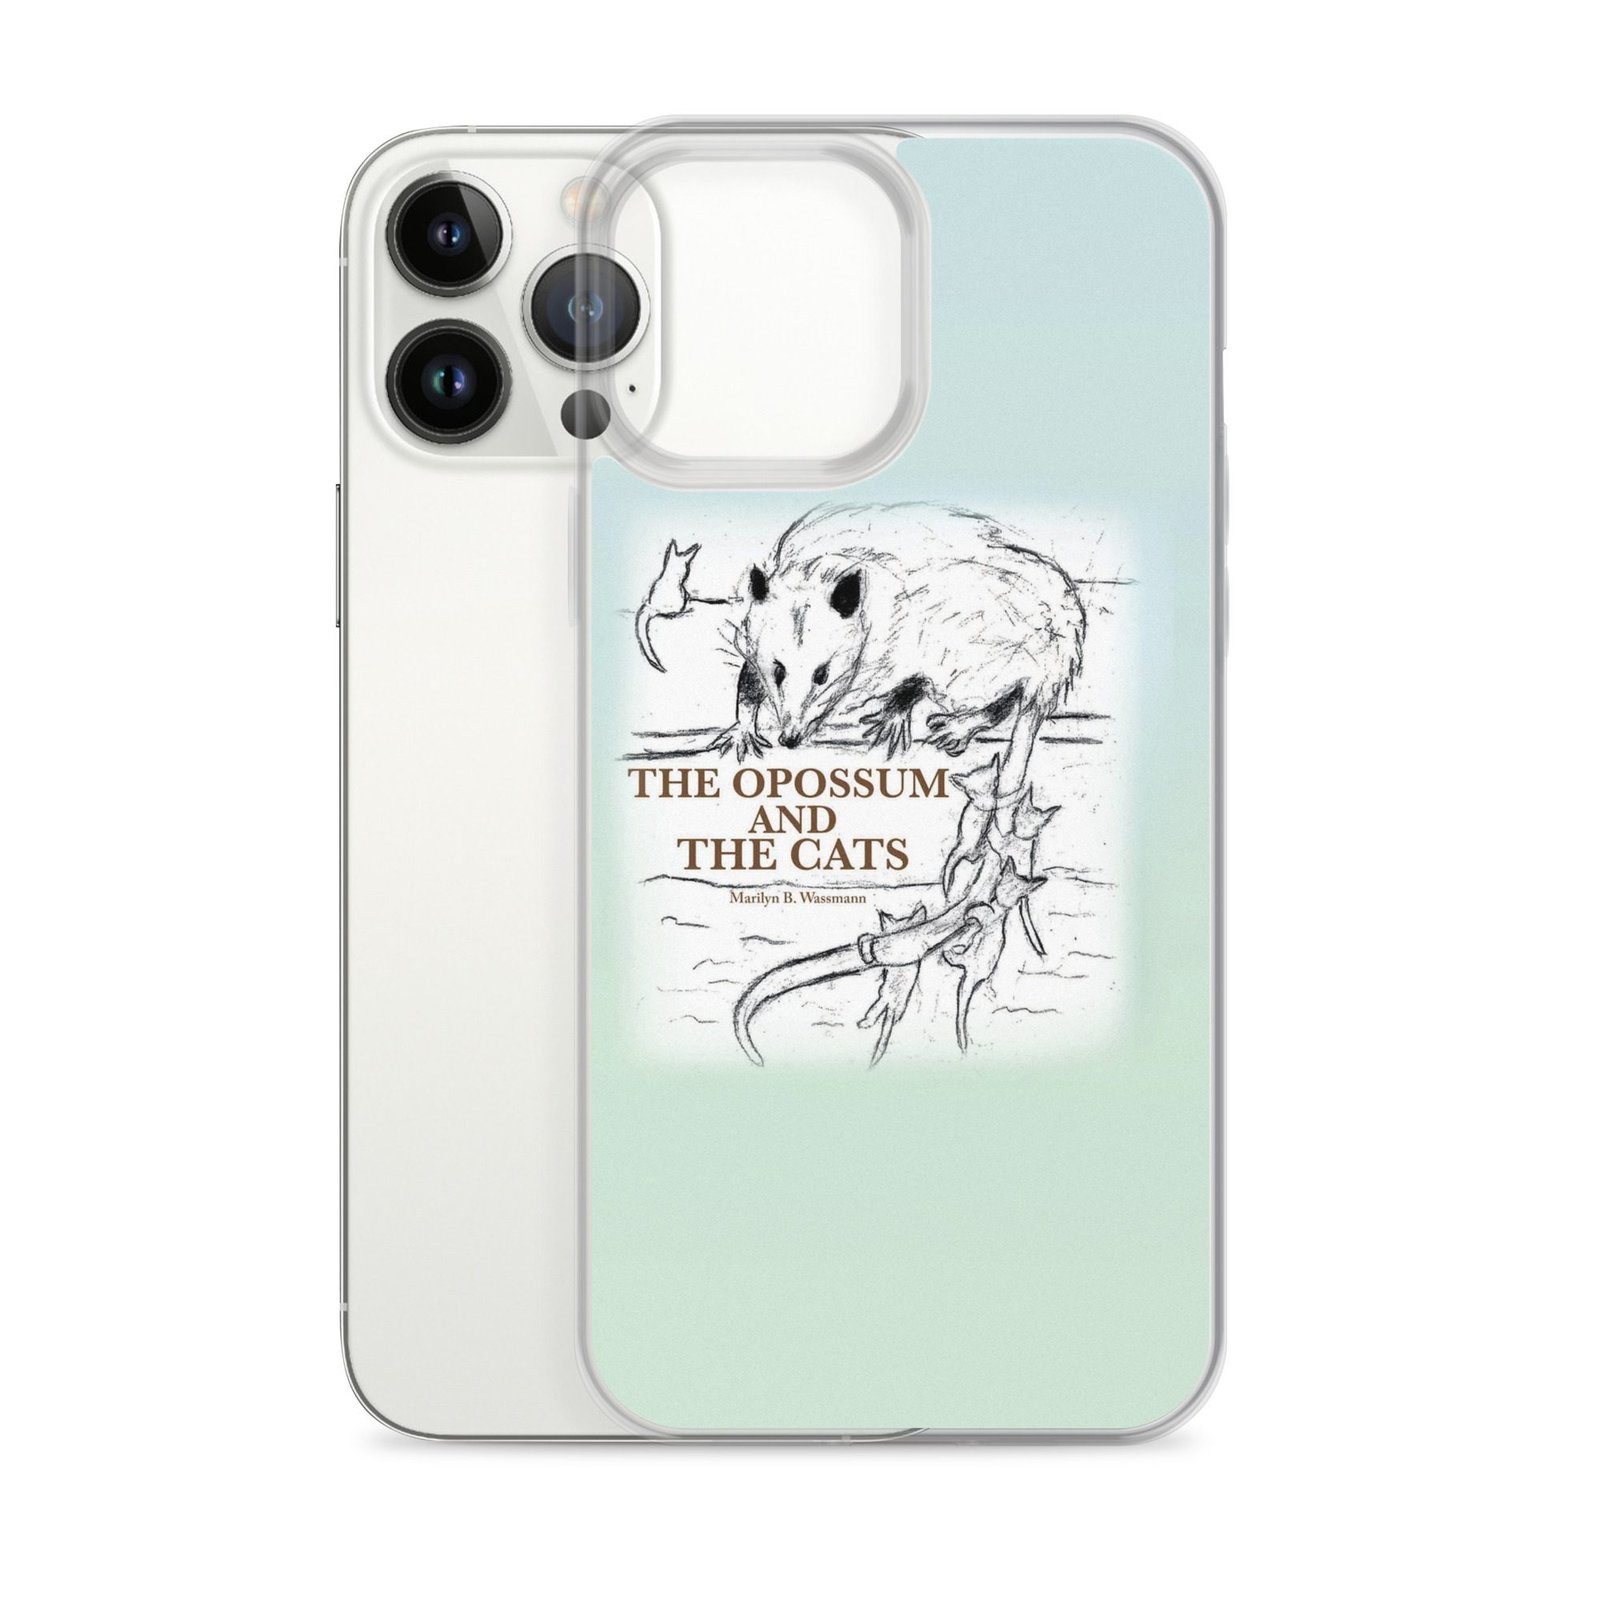 iphone case iphone 13 pro max case with phone 630dc95103617